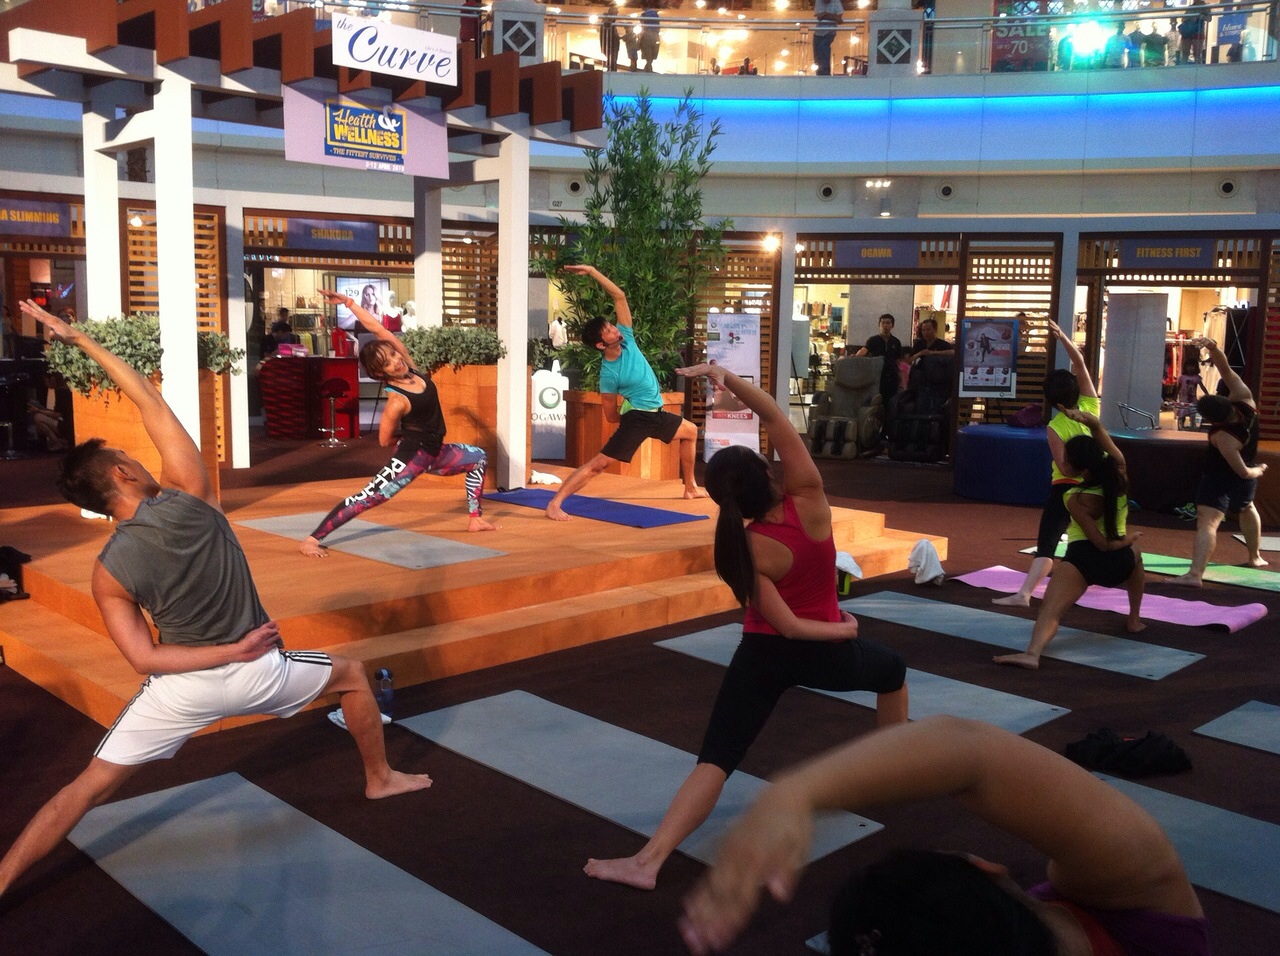 Fitness First instructors conducting a Body Balance class at the Curve's Centre Court.